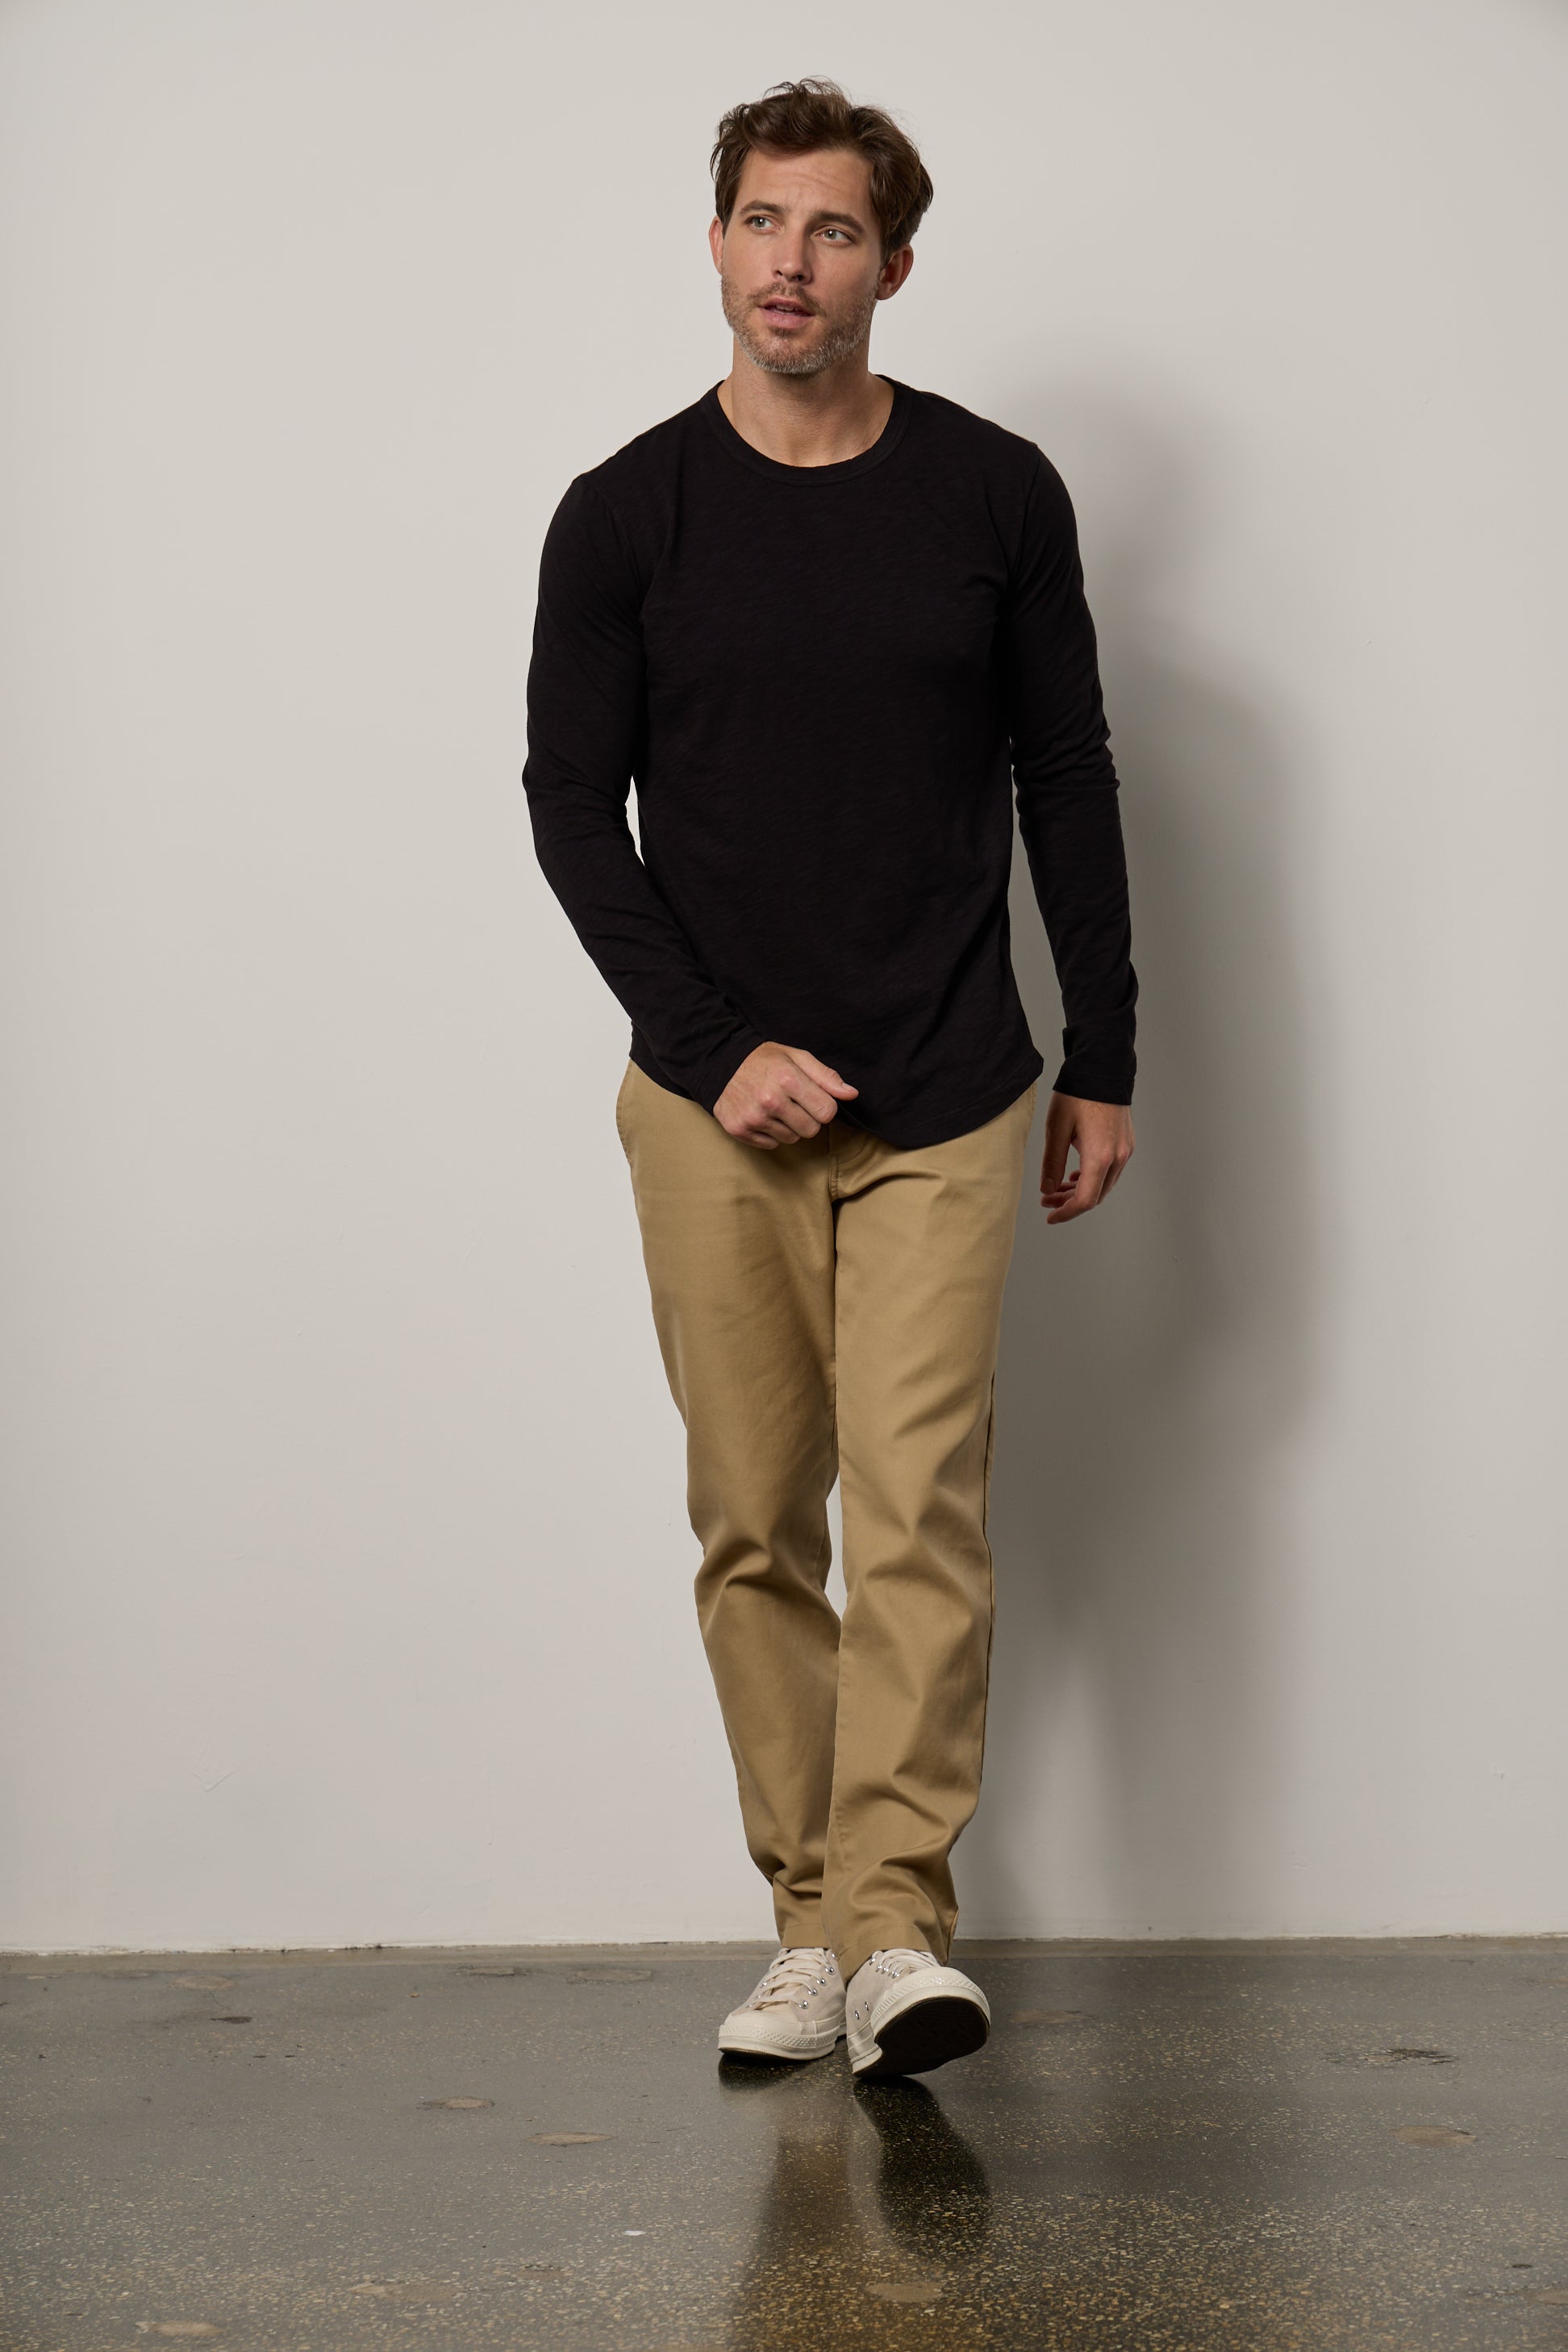   A man in a flawless fit, wearing a Velvet by Graham & Spencer KAI CREW NECK TEE and khaki pants. 